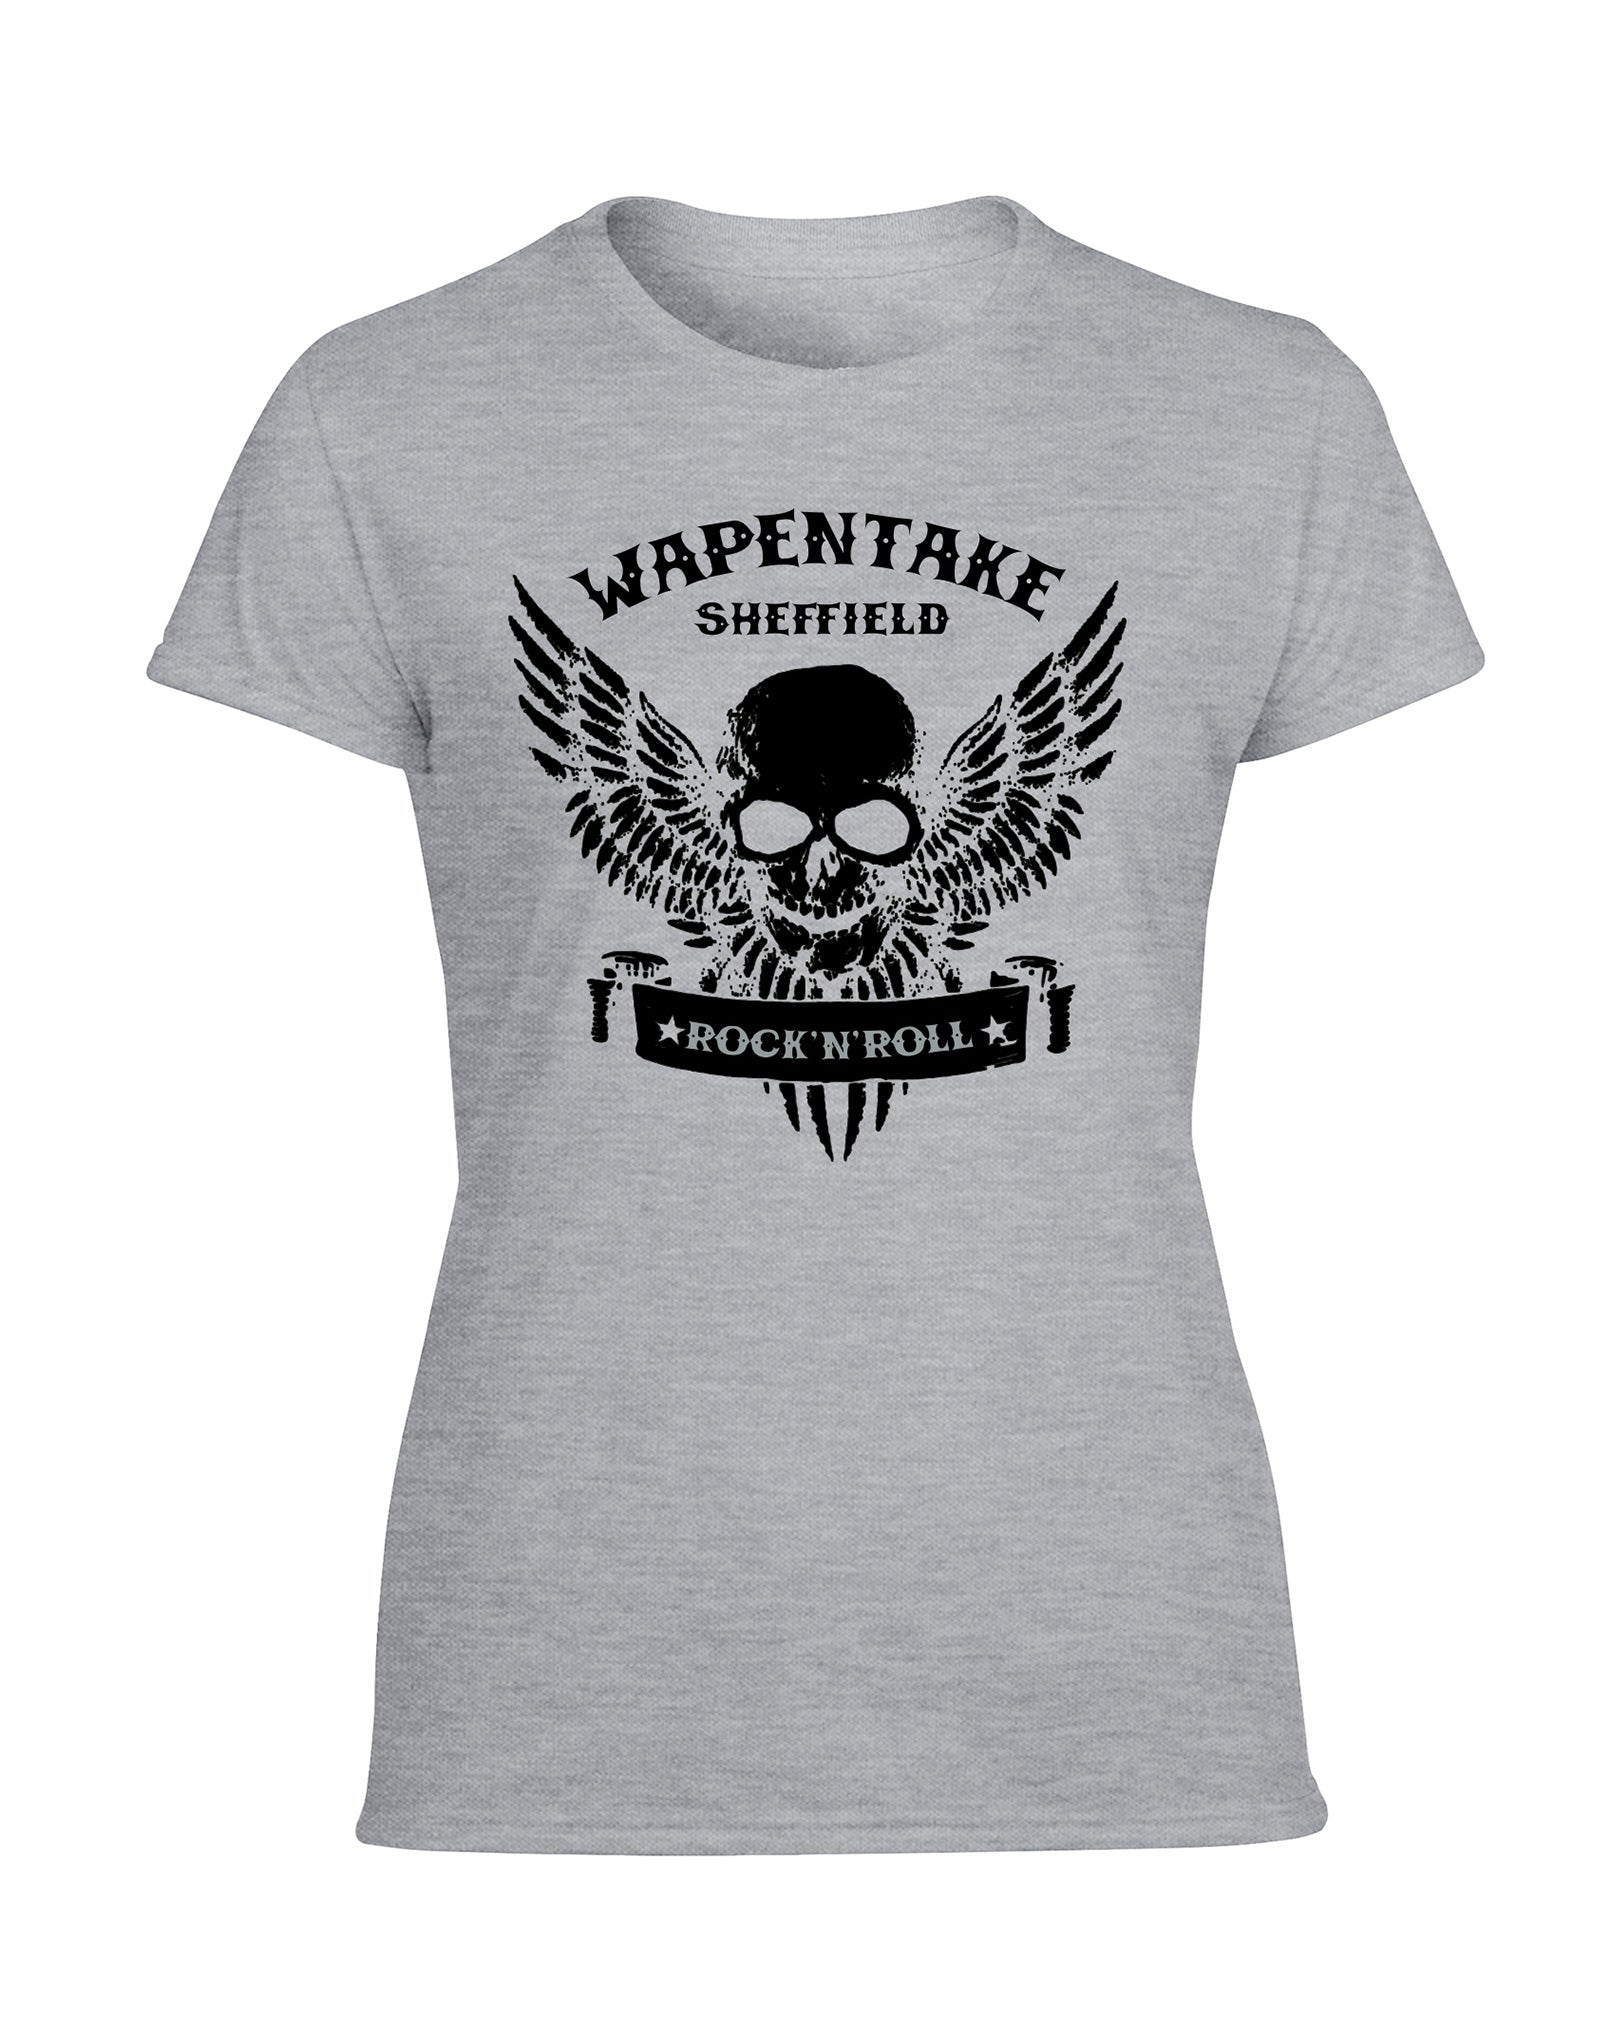 Wapentake skull/wings ladies fit T-shirt - various colours - Dirty Stop Outs